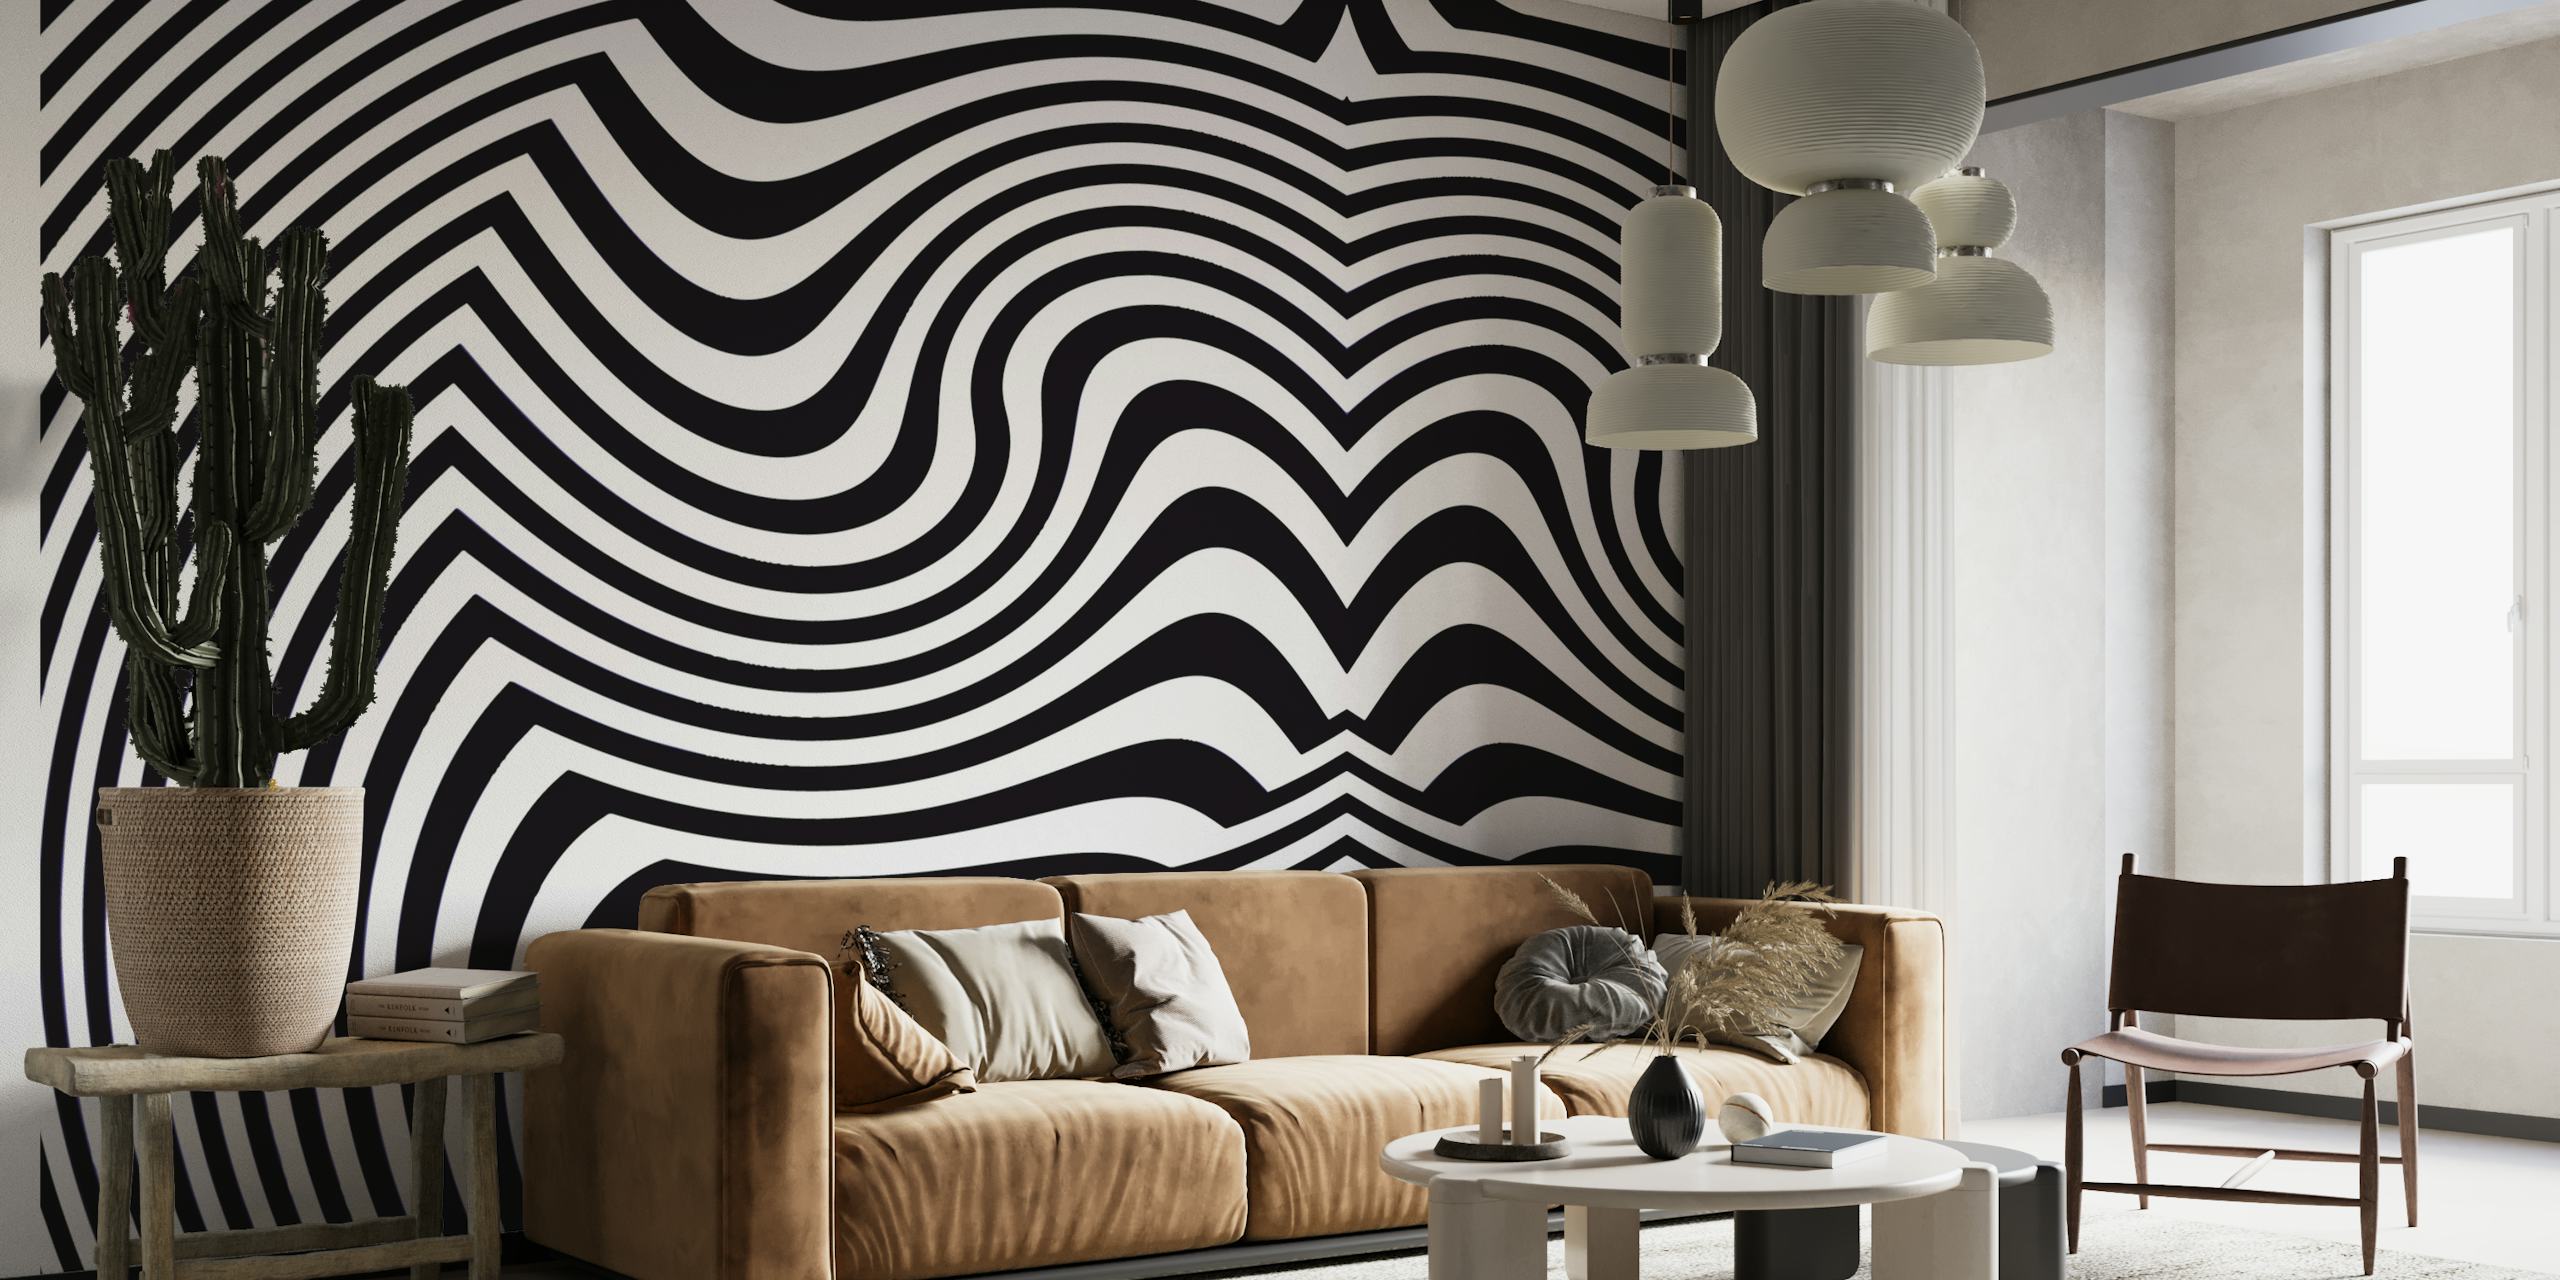 Stunning Black and White Optical Illusion Wallpaper design for interior walls